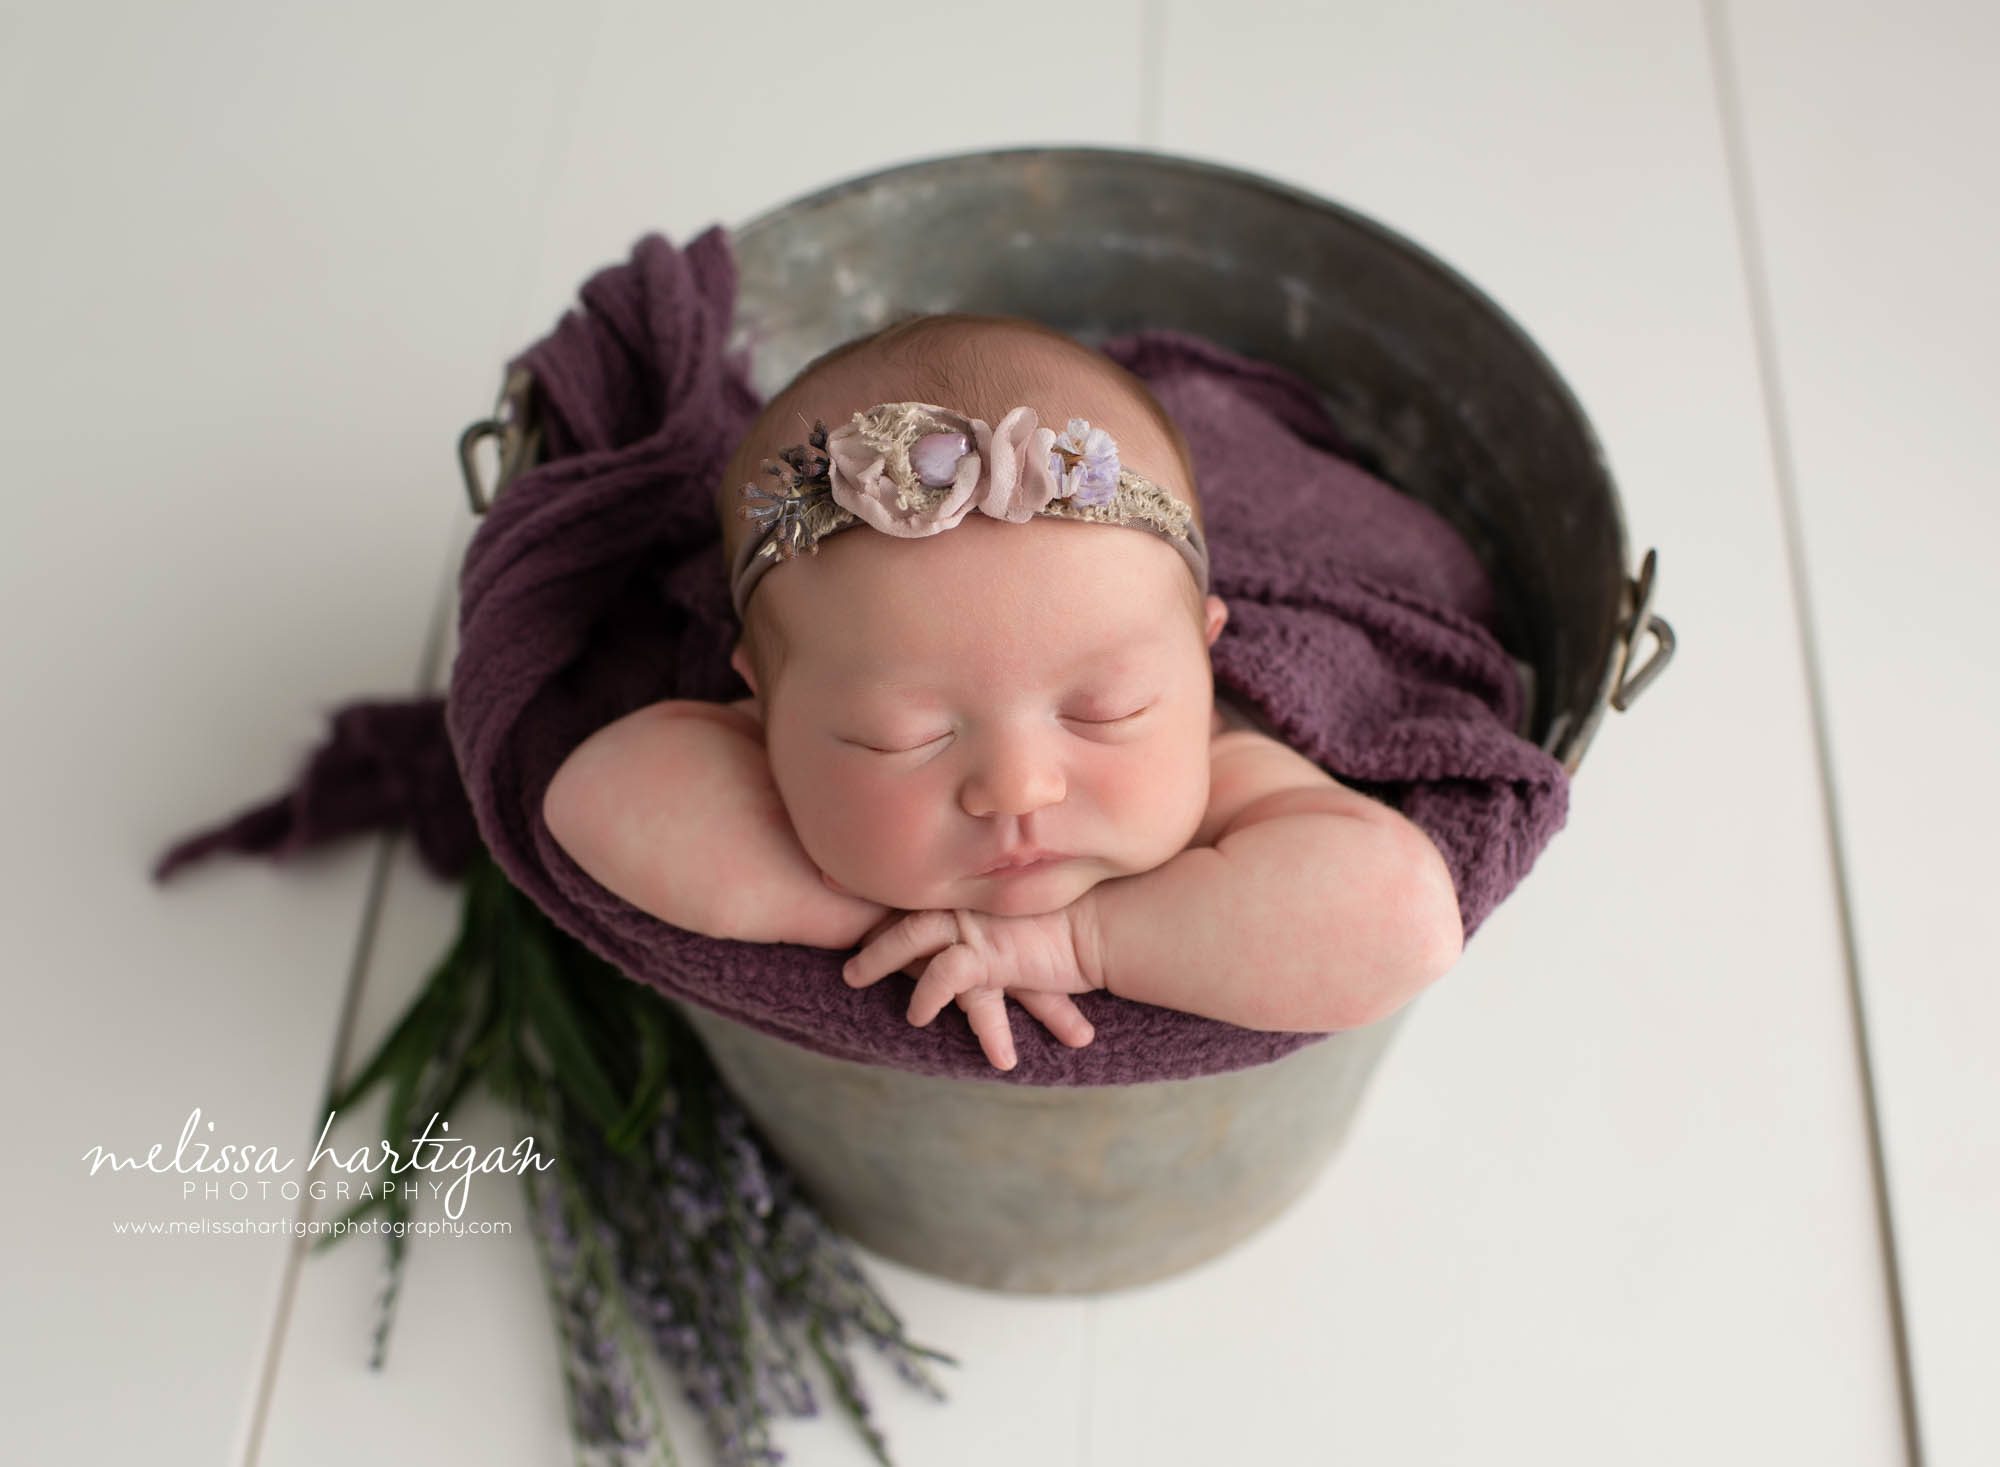 Baby girl posed in metal bucket with floral headband and stems of lavender